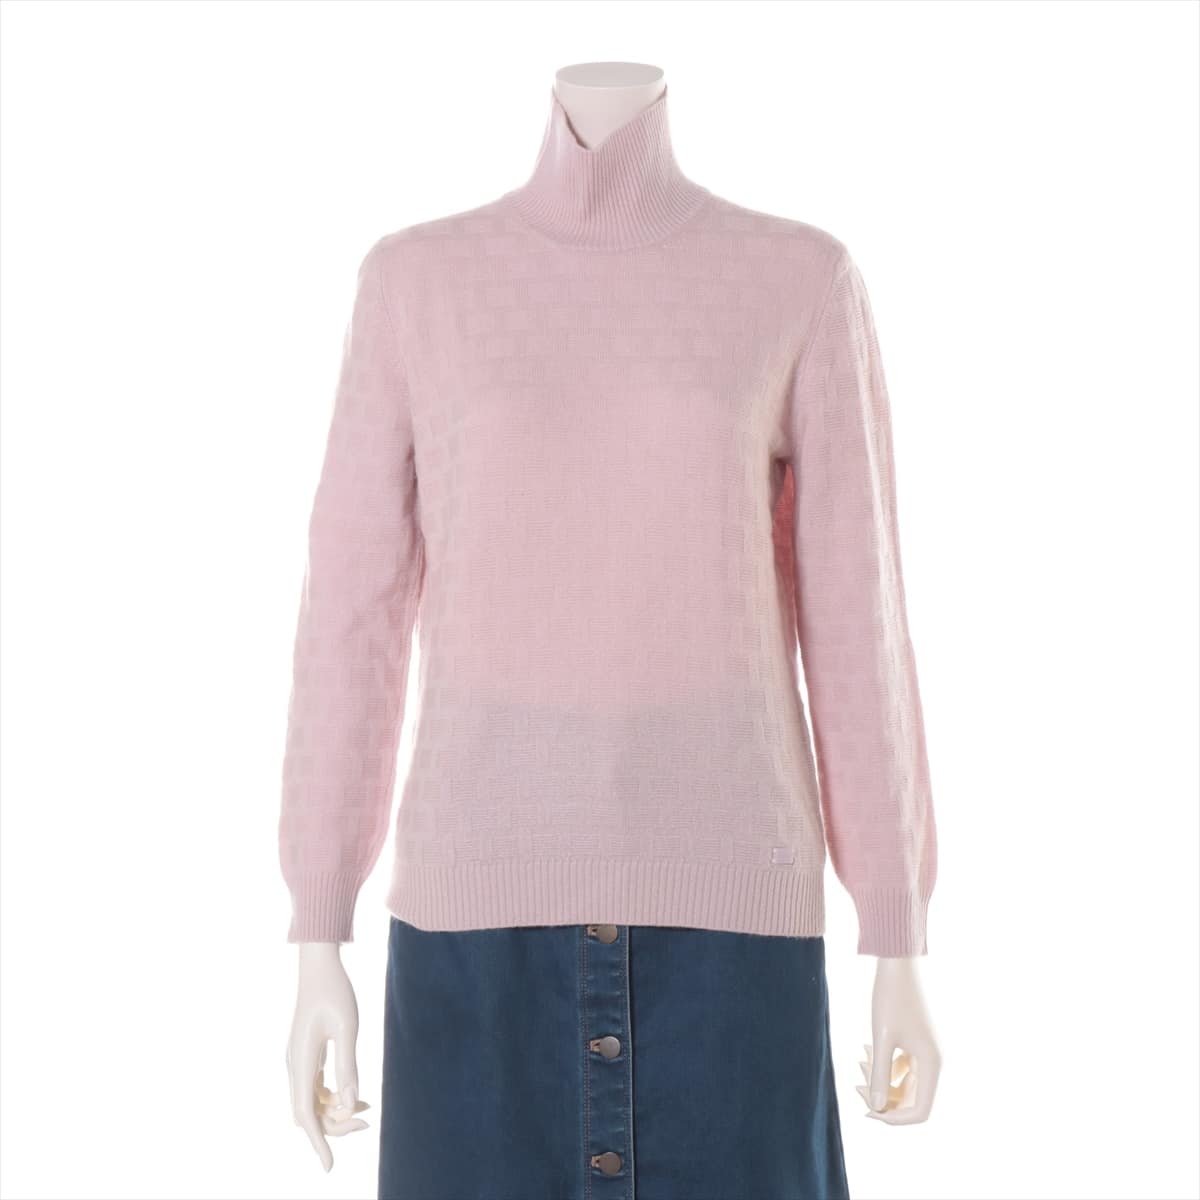 Chanel 04A Cashmere High-Neck Knit 42 Ladies' Pink